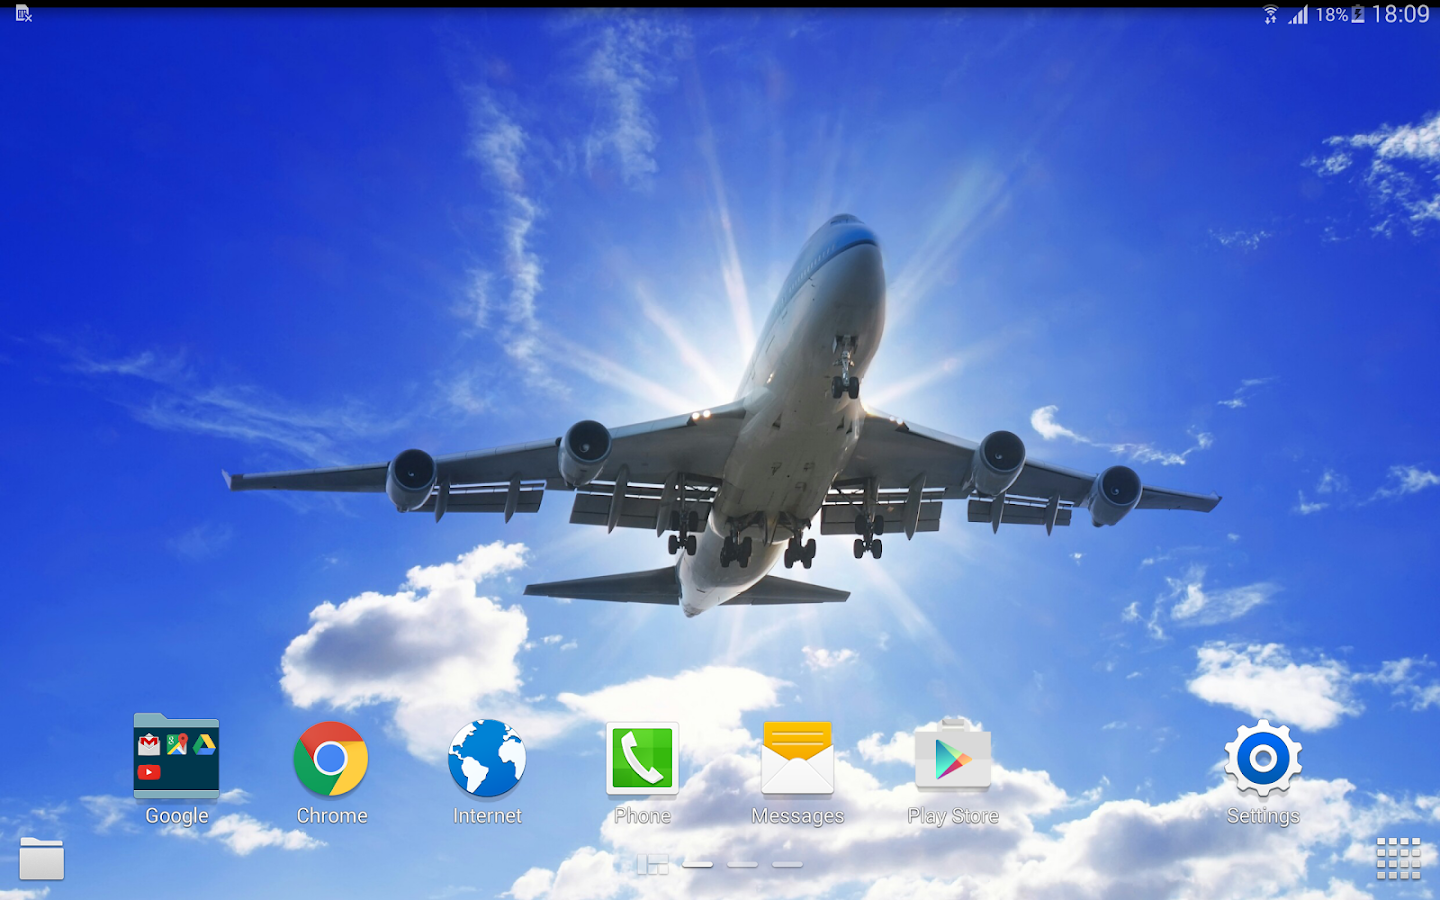 Aircraft Wallpapers 4k  Android Apps on Google Play